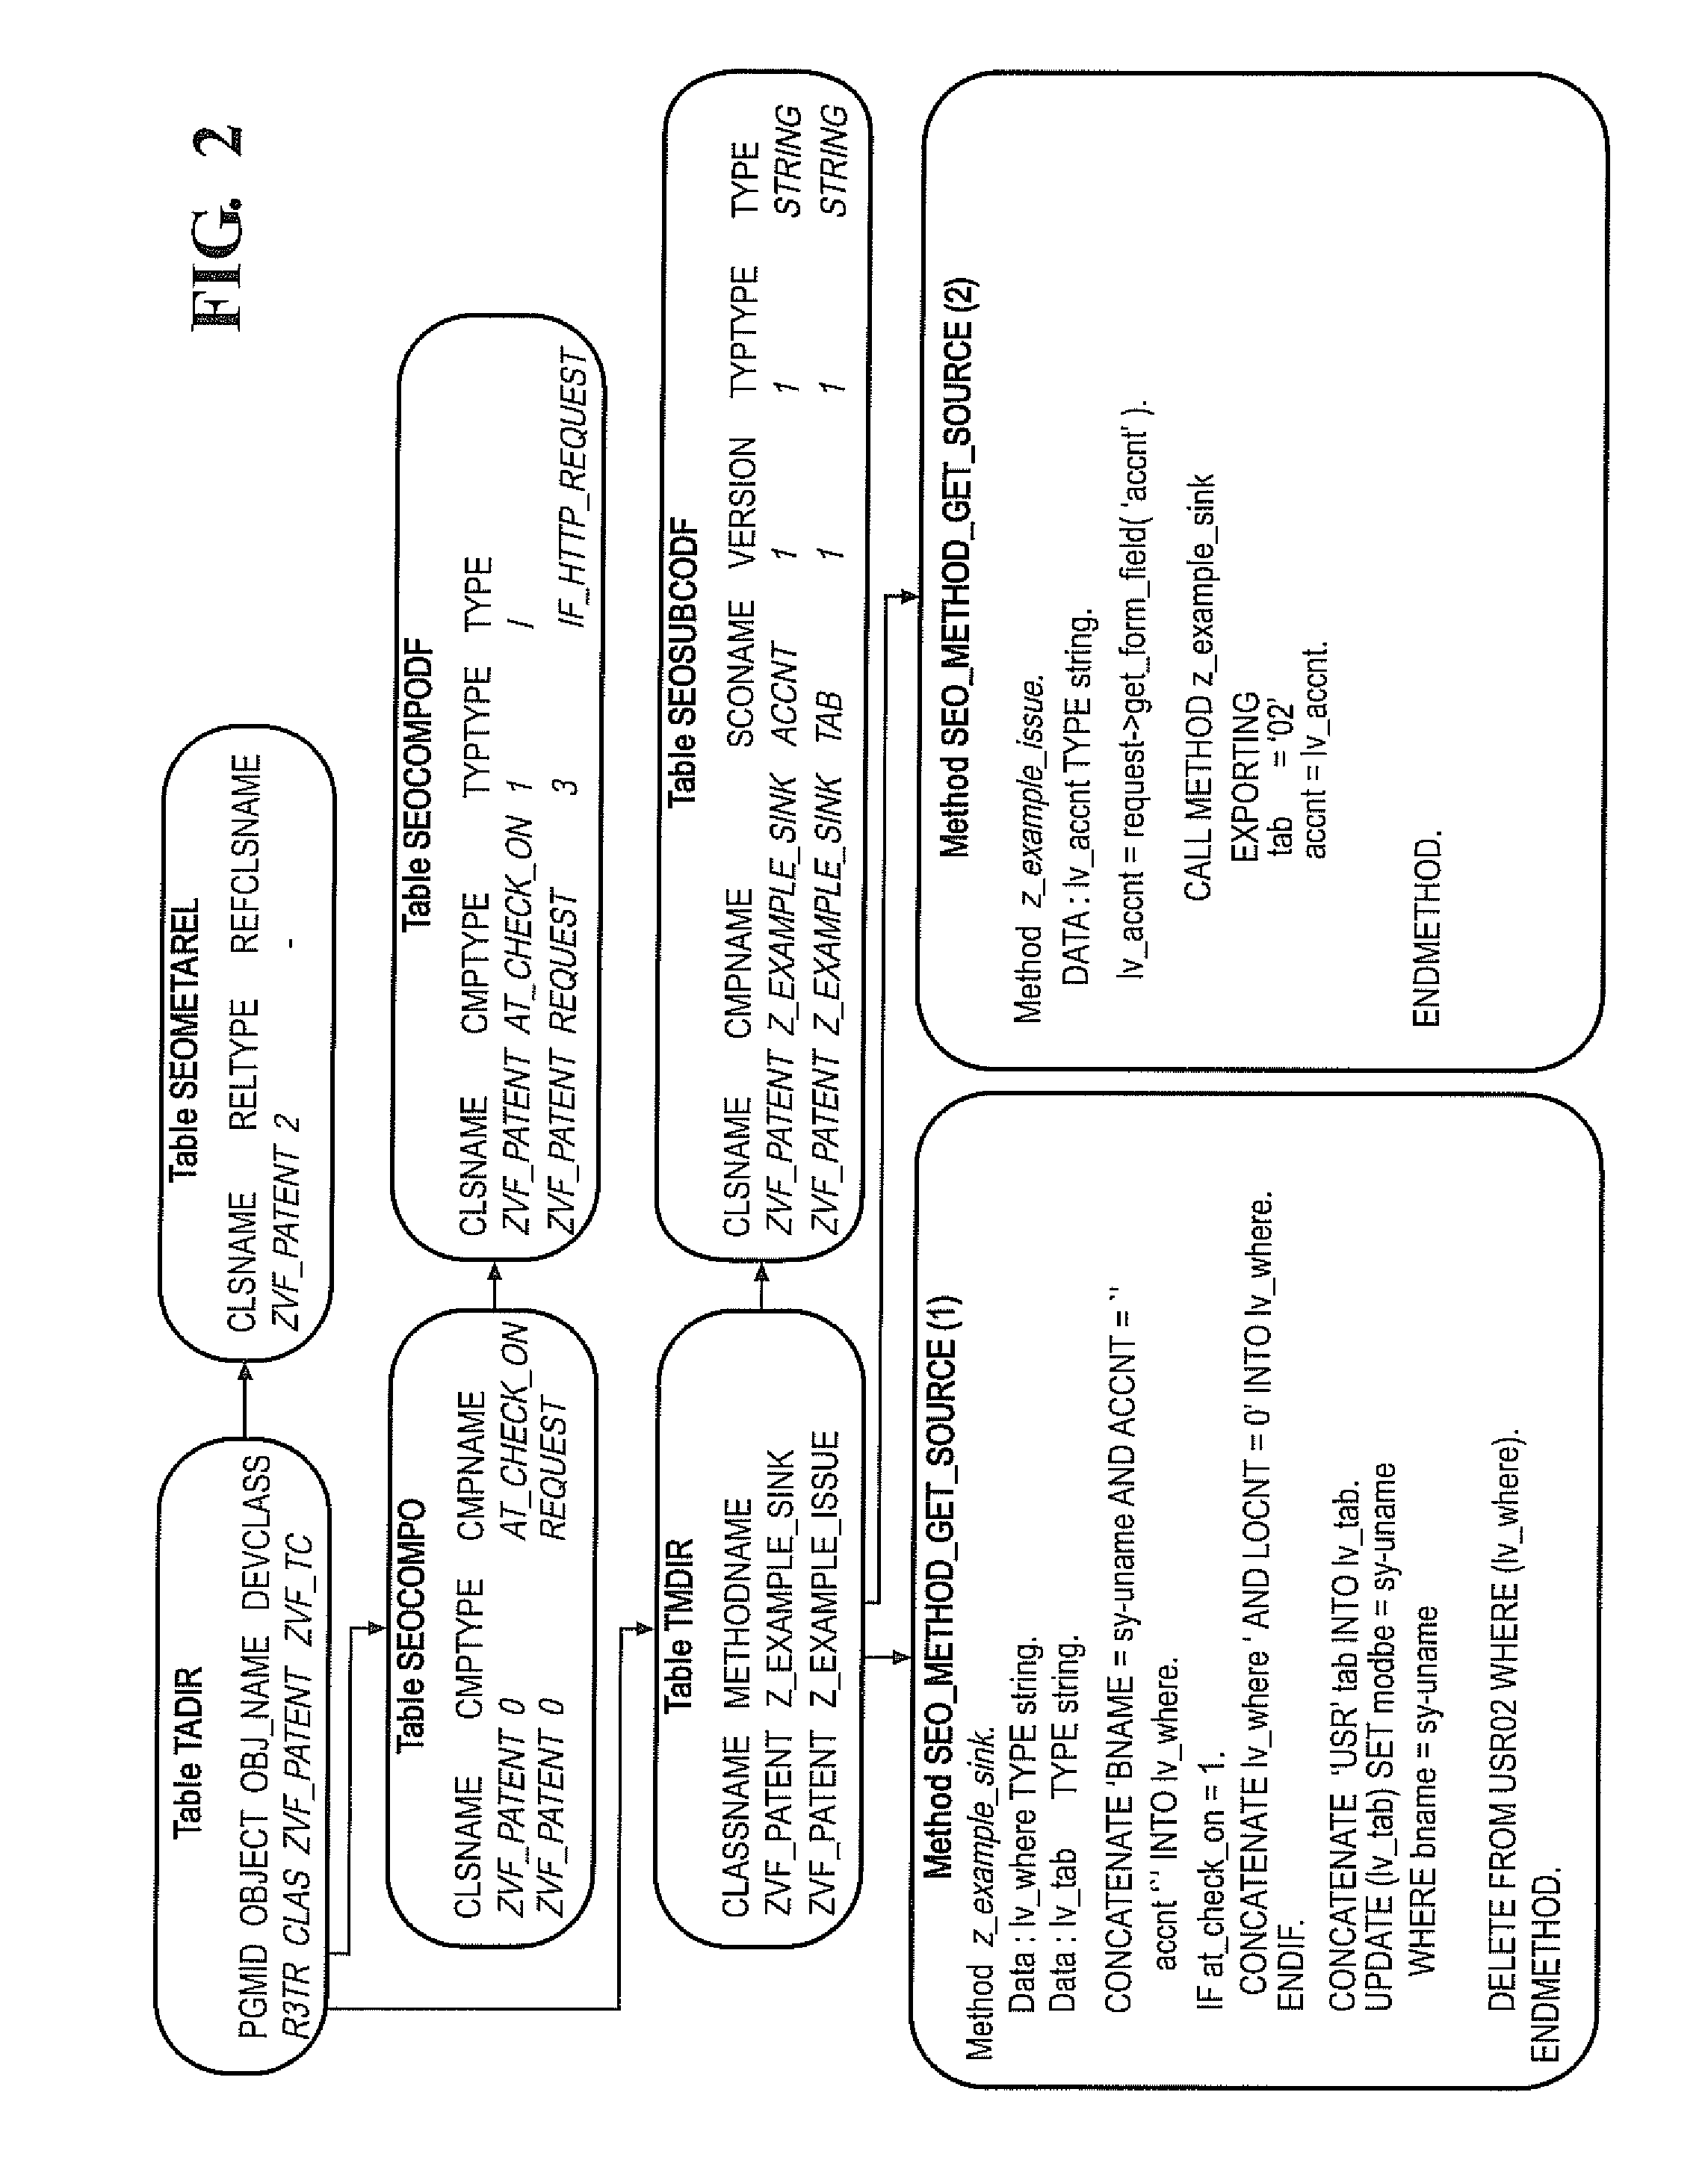 APPARATUS AND METHOD FOR DETECTING, PRIORITIZING AND FIXING SECURITY DEFECTS AND COMPLIANCE VIOLATIONS IN SAP® ABAPtm CODE